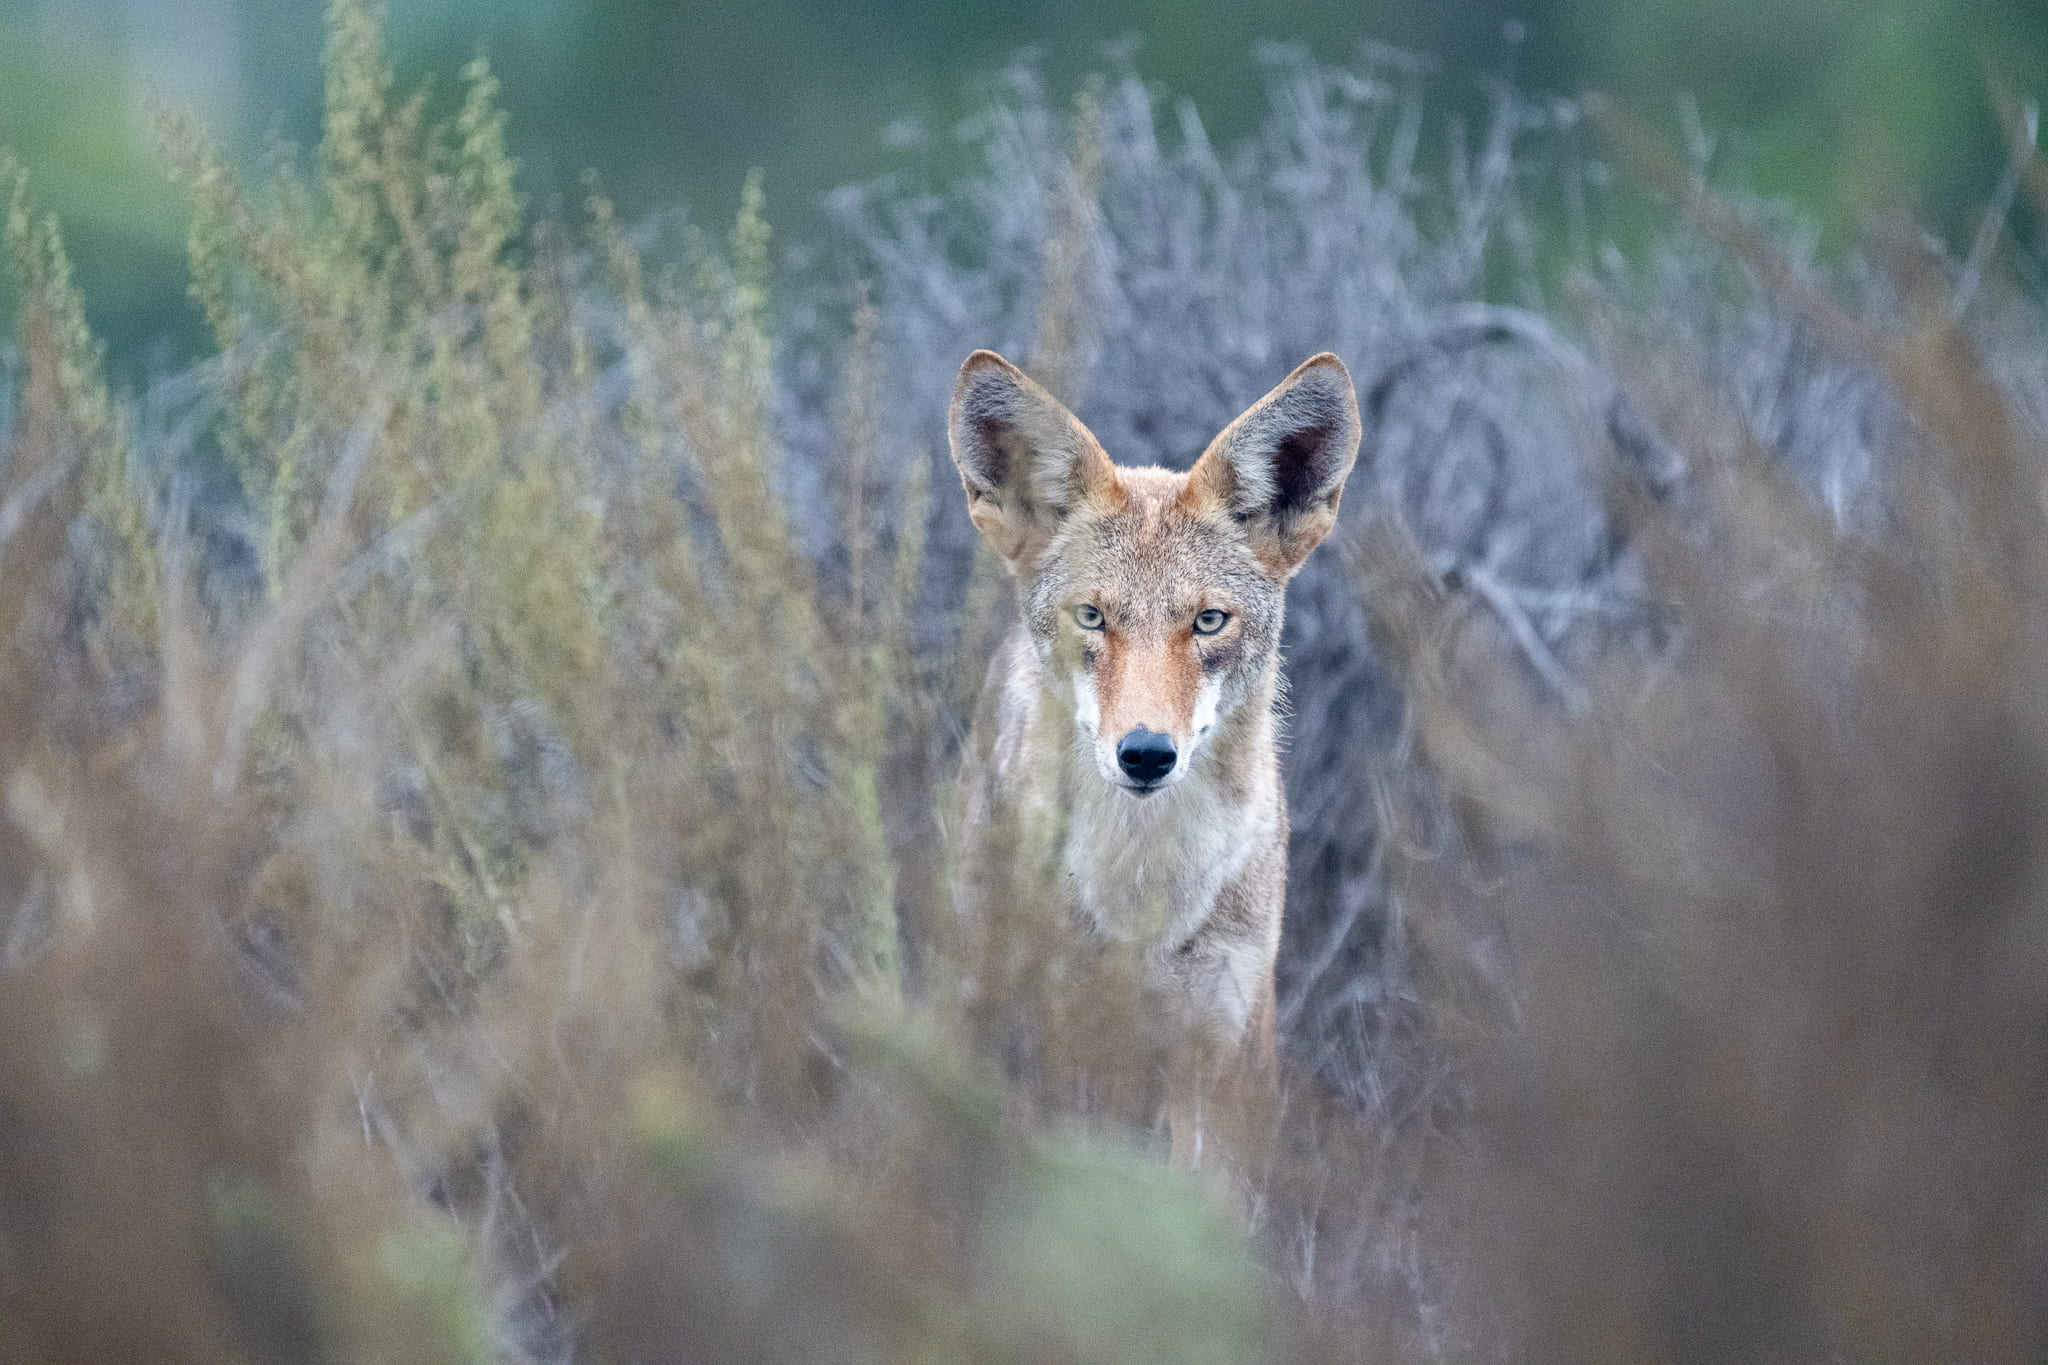 The UCI Ecological Preserve is also home to such mammals as this curious coyote.